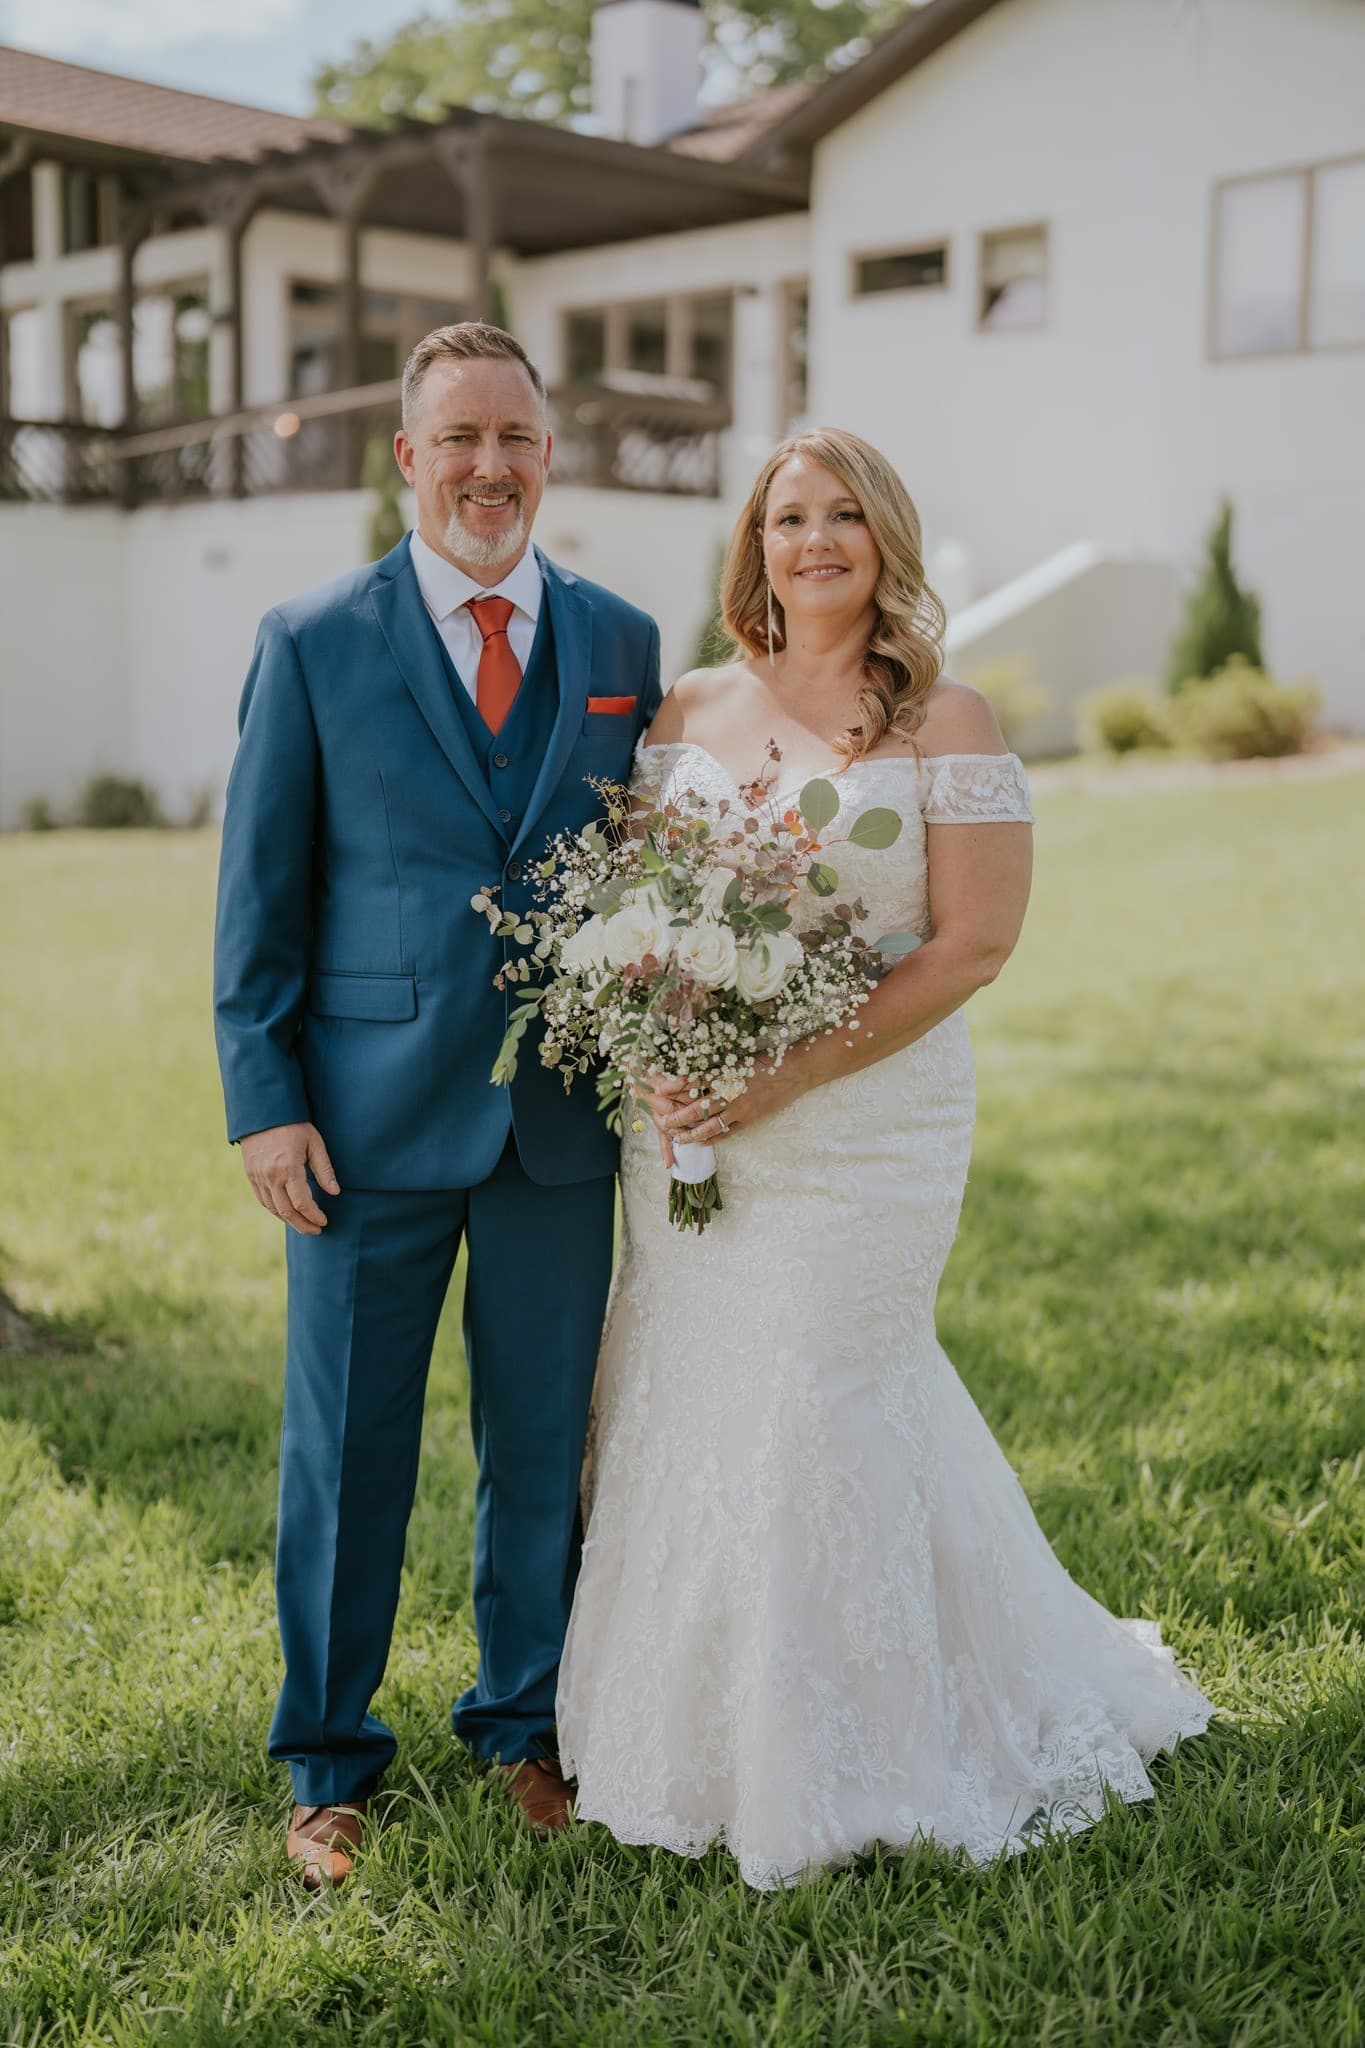 An Unforgettable Out-of-State Wedding Experience with Stephanie and David